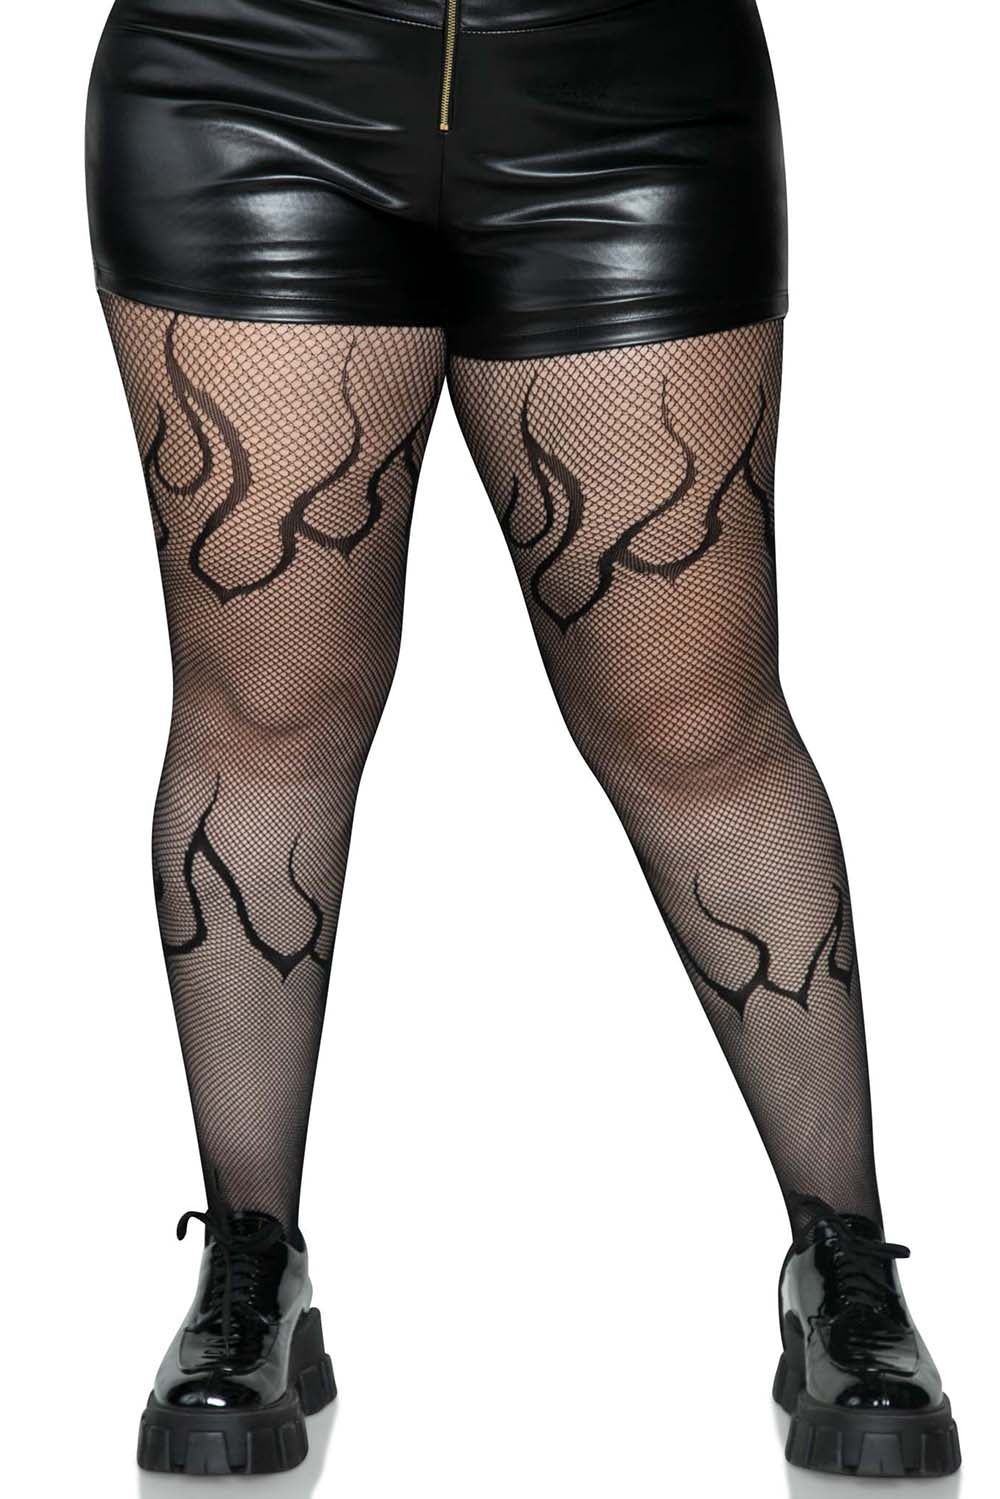 Flame Net Tights [Plus Size] [Black]